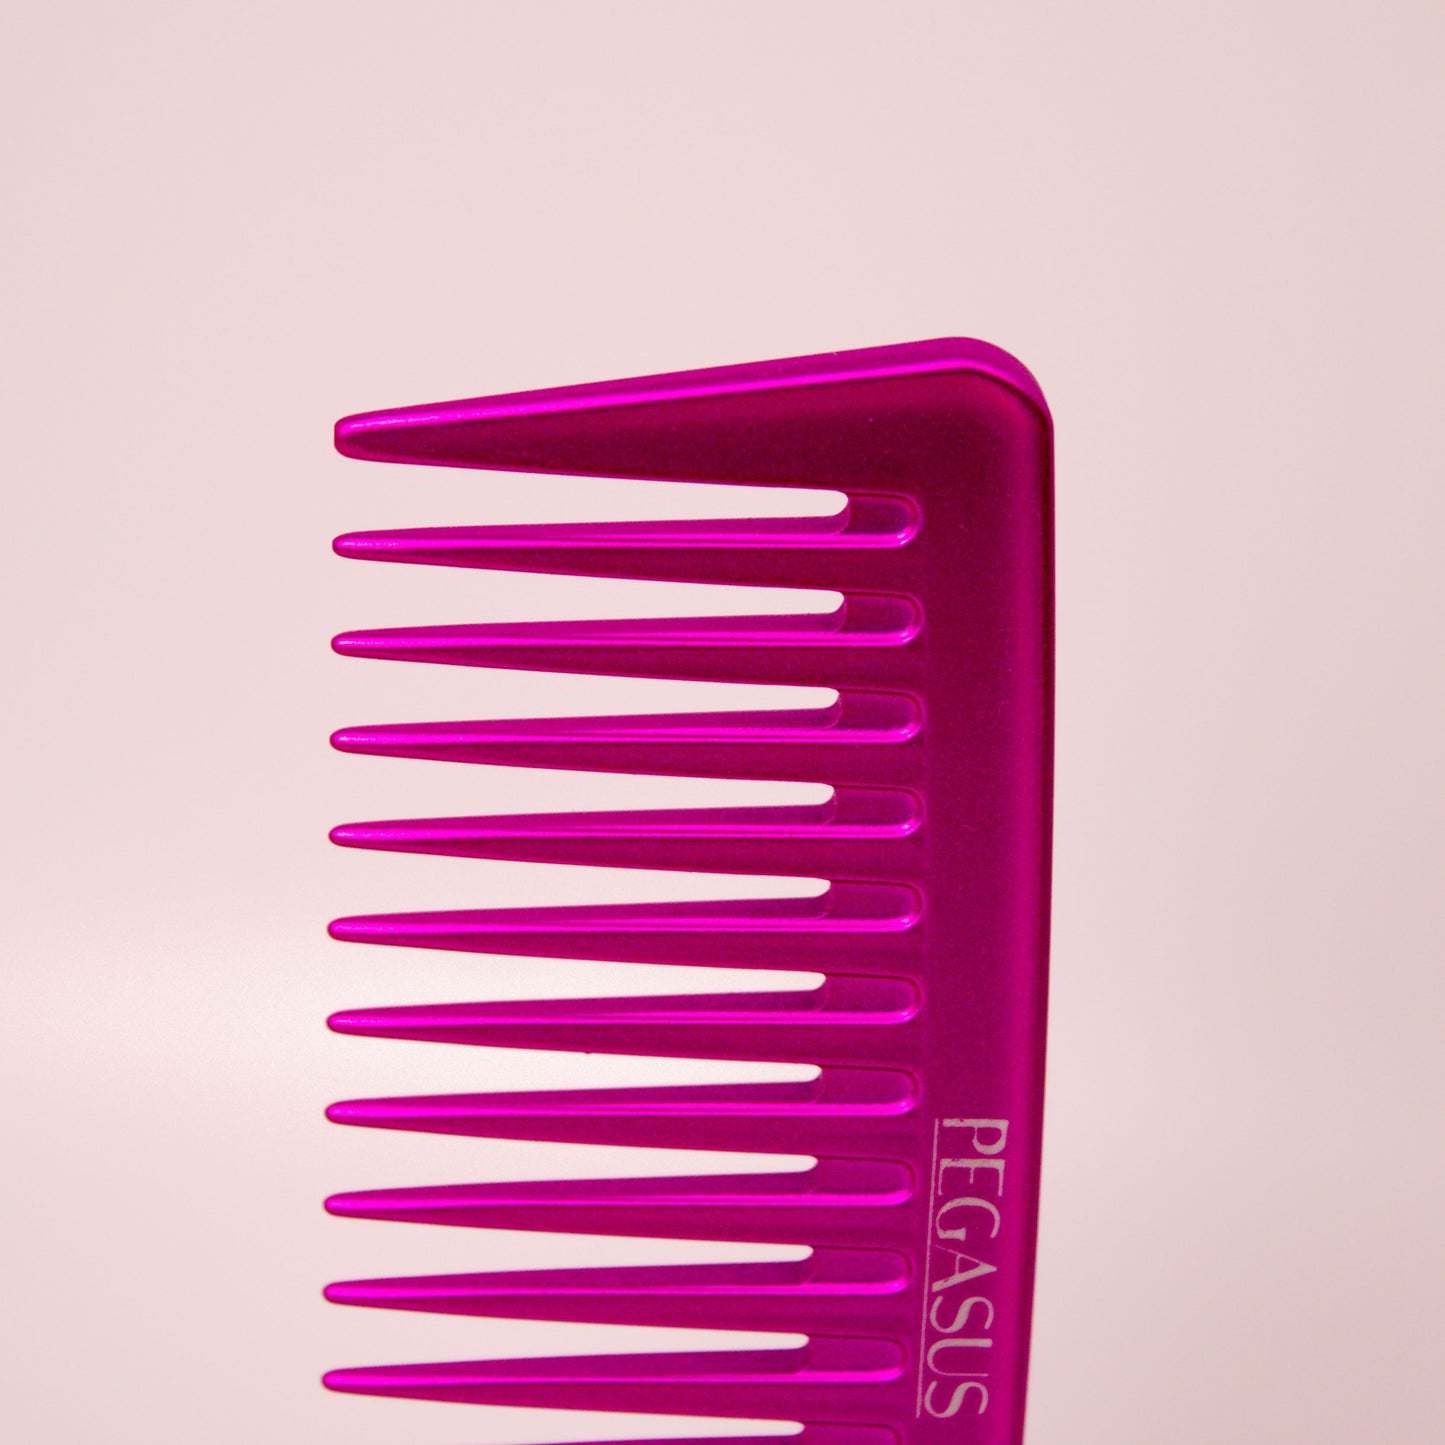 Pegasus MICOLOR 404, 7in Hard Rubber Wide Tooth Tall Styling Comb, Handmade, Seamless, Smooth Edges, Anti Static, Heat and Chemically Resistant, Wet Hair, Everyday Grooming Comb | Peines de goma dura - Pink